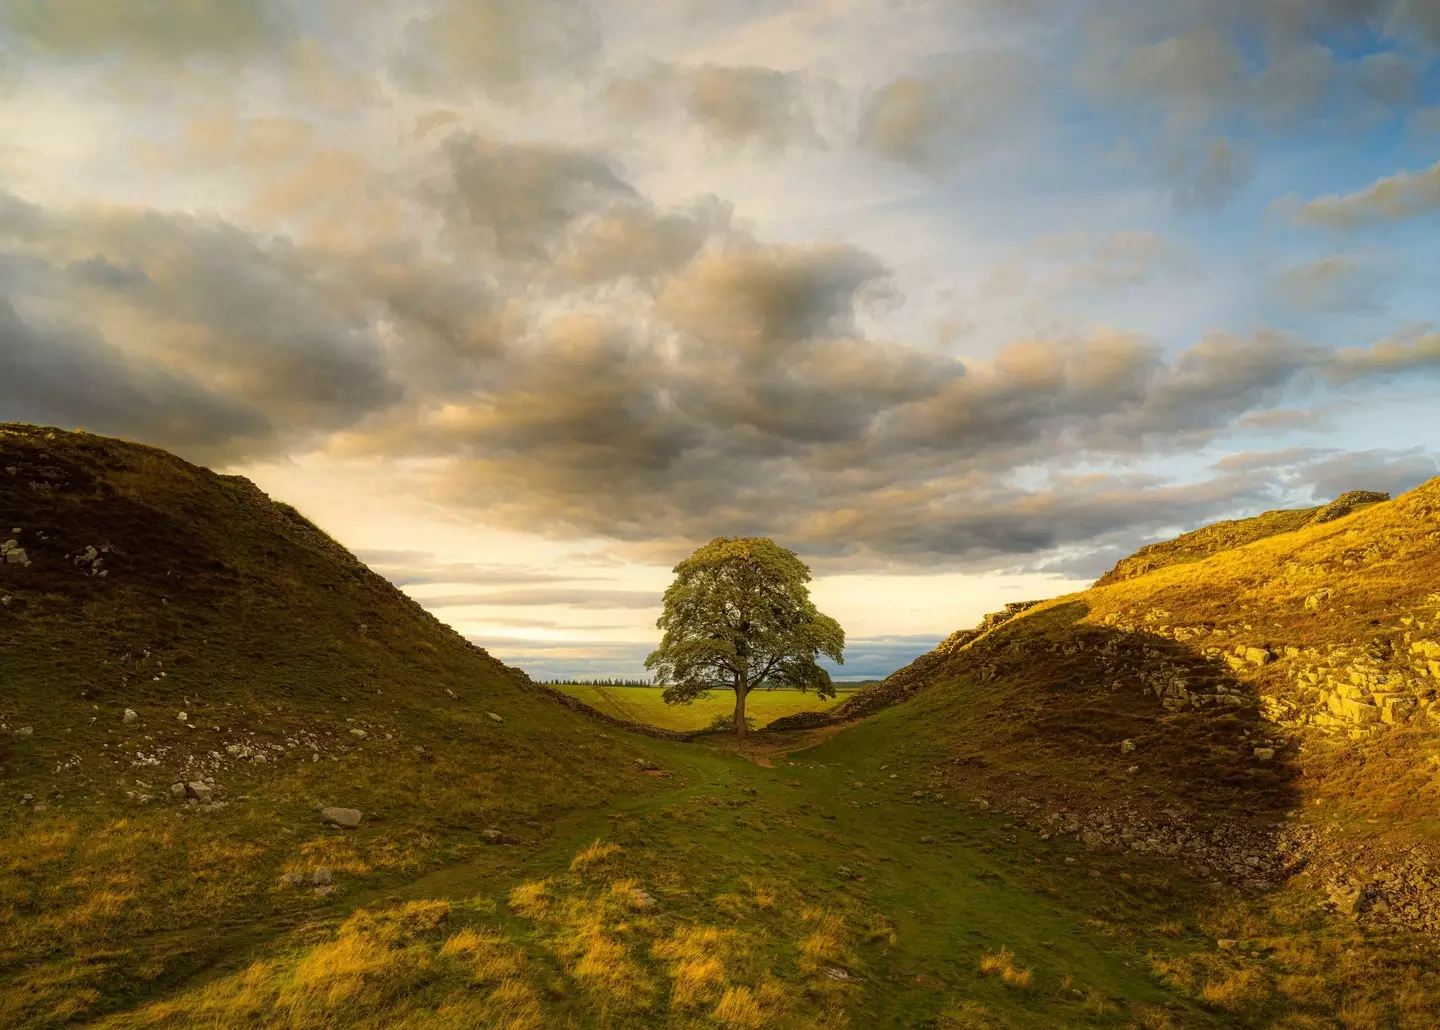 The iconic Sycamore Gap tree. (Michael White/Northumberland National Park/Facebook)